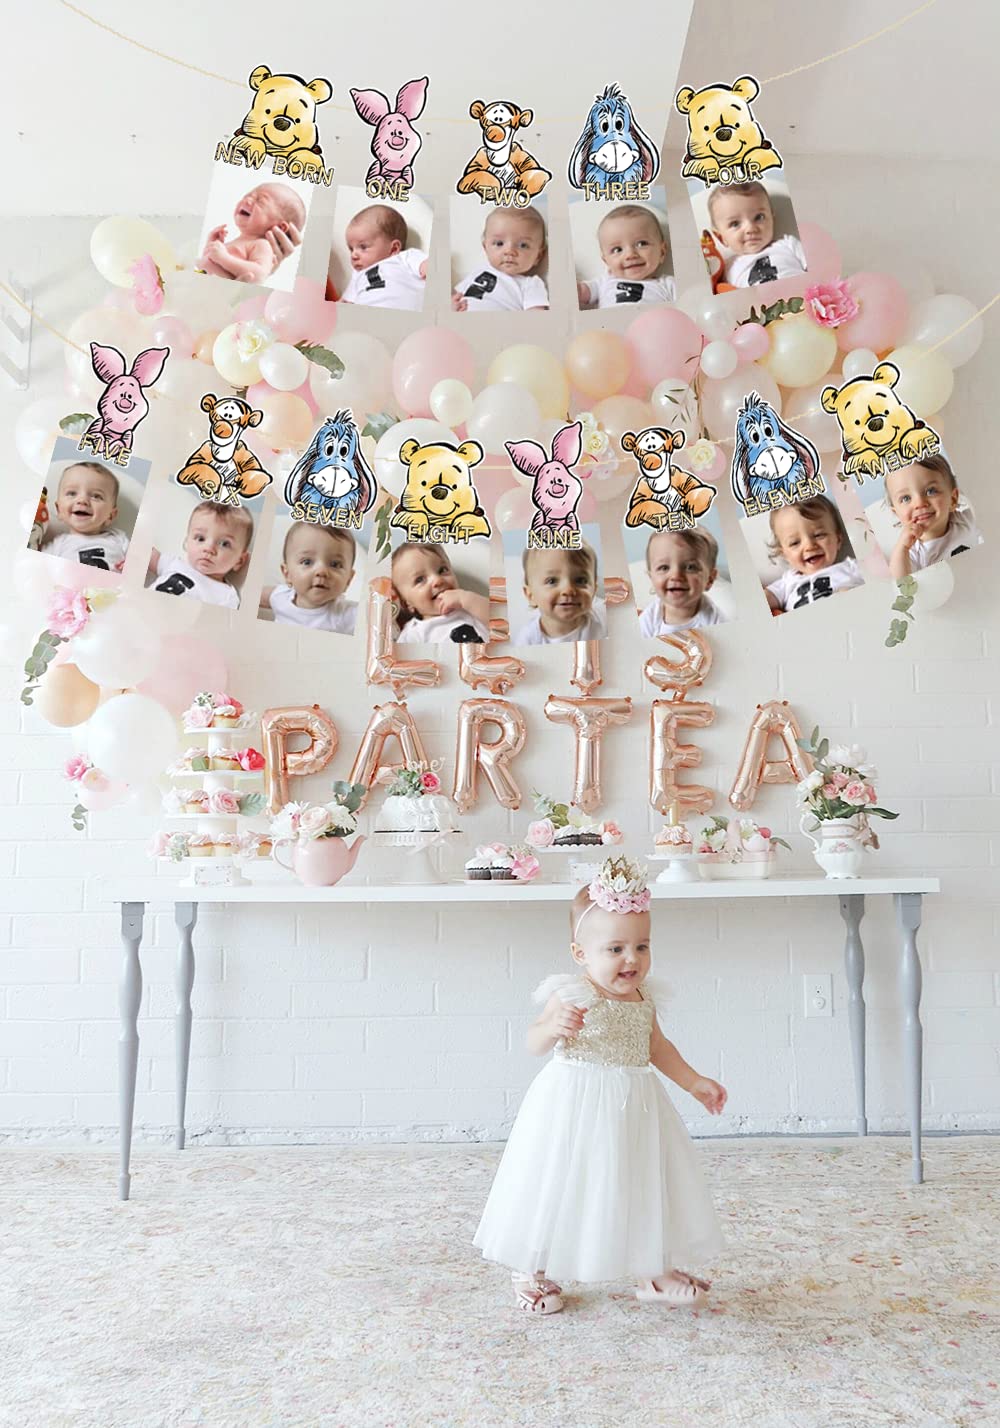 Winnie Party Banner For 1st Birthday Decoration,First Birthday Baby Photo Banner Party Decoration Party Supplies